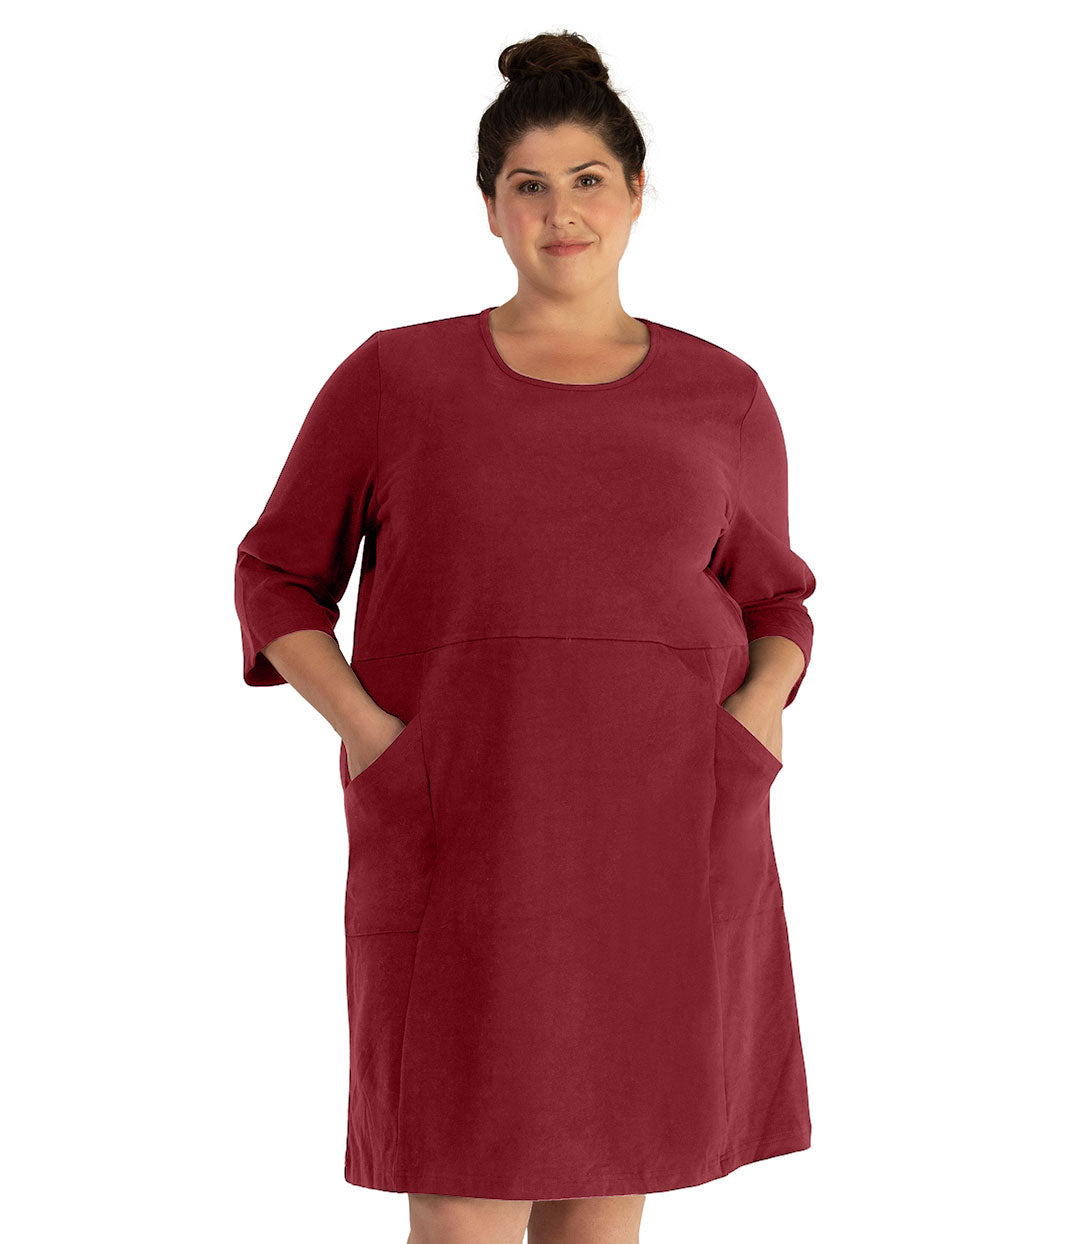 Plus size woman, facing front, wearing JunoActive plus size Legacy Cotton Casual ¾ Sleeve Dress in the color Garnet. Both hands are in the dress pockets at her hip. The dress length is at her knee. 